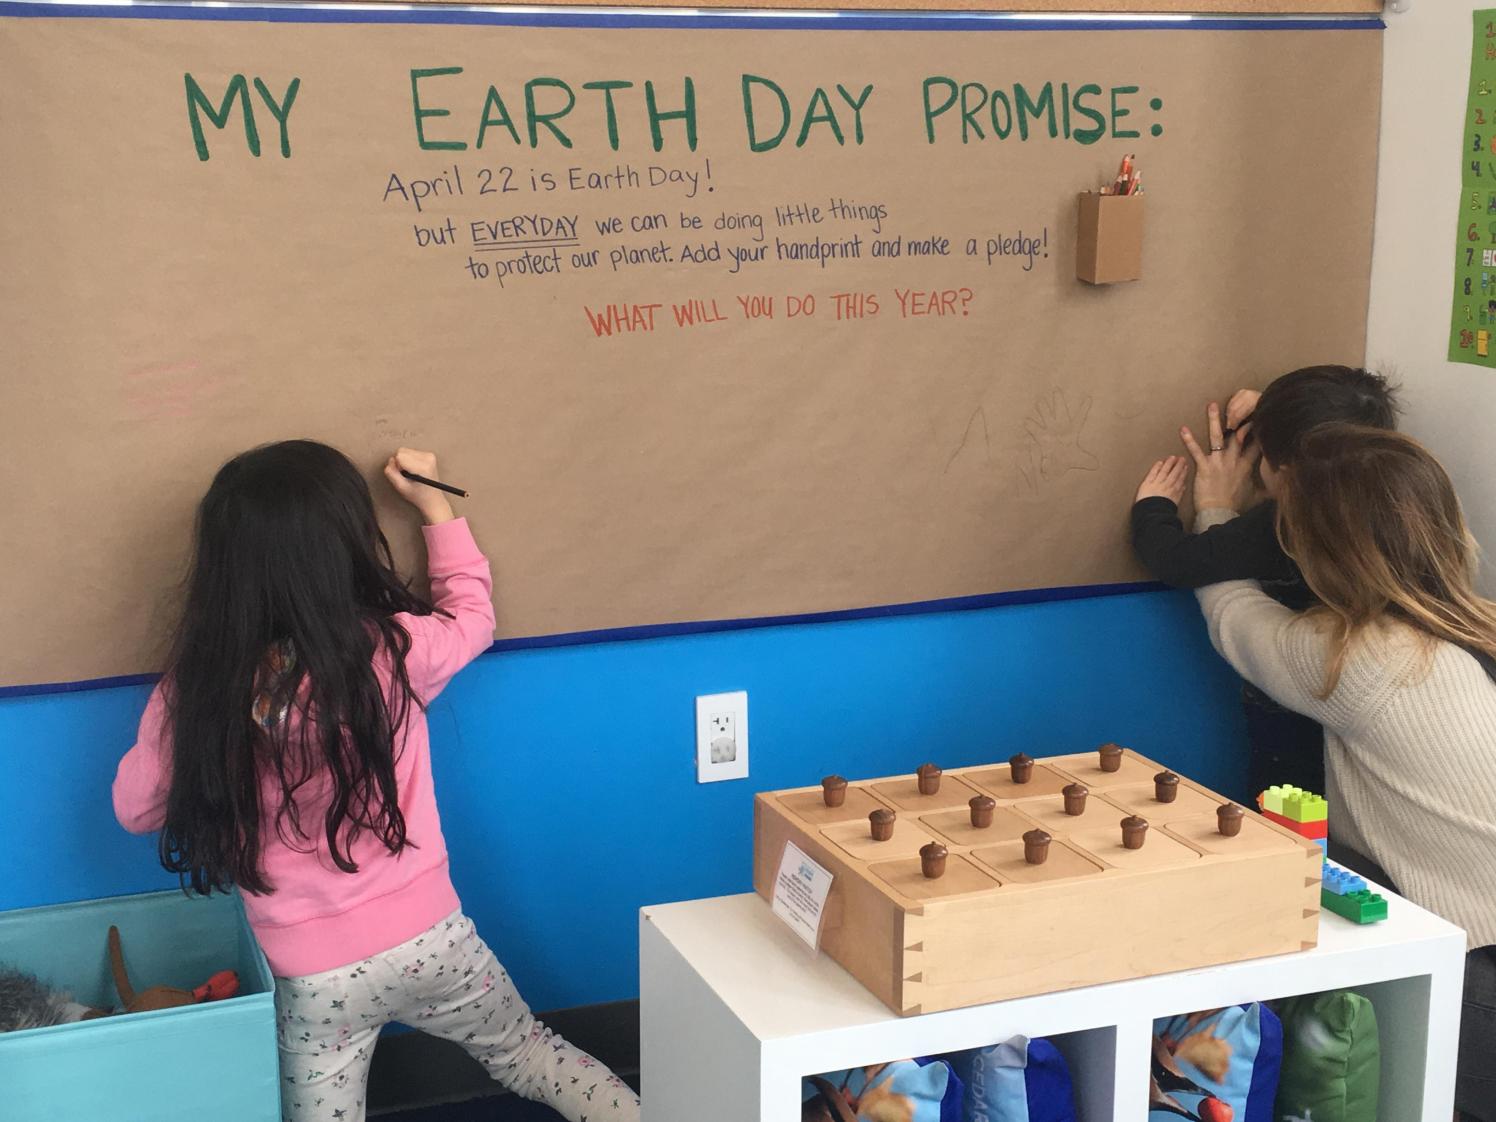 Children writing on an Earth Day poster.